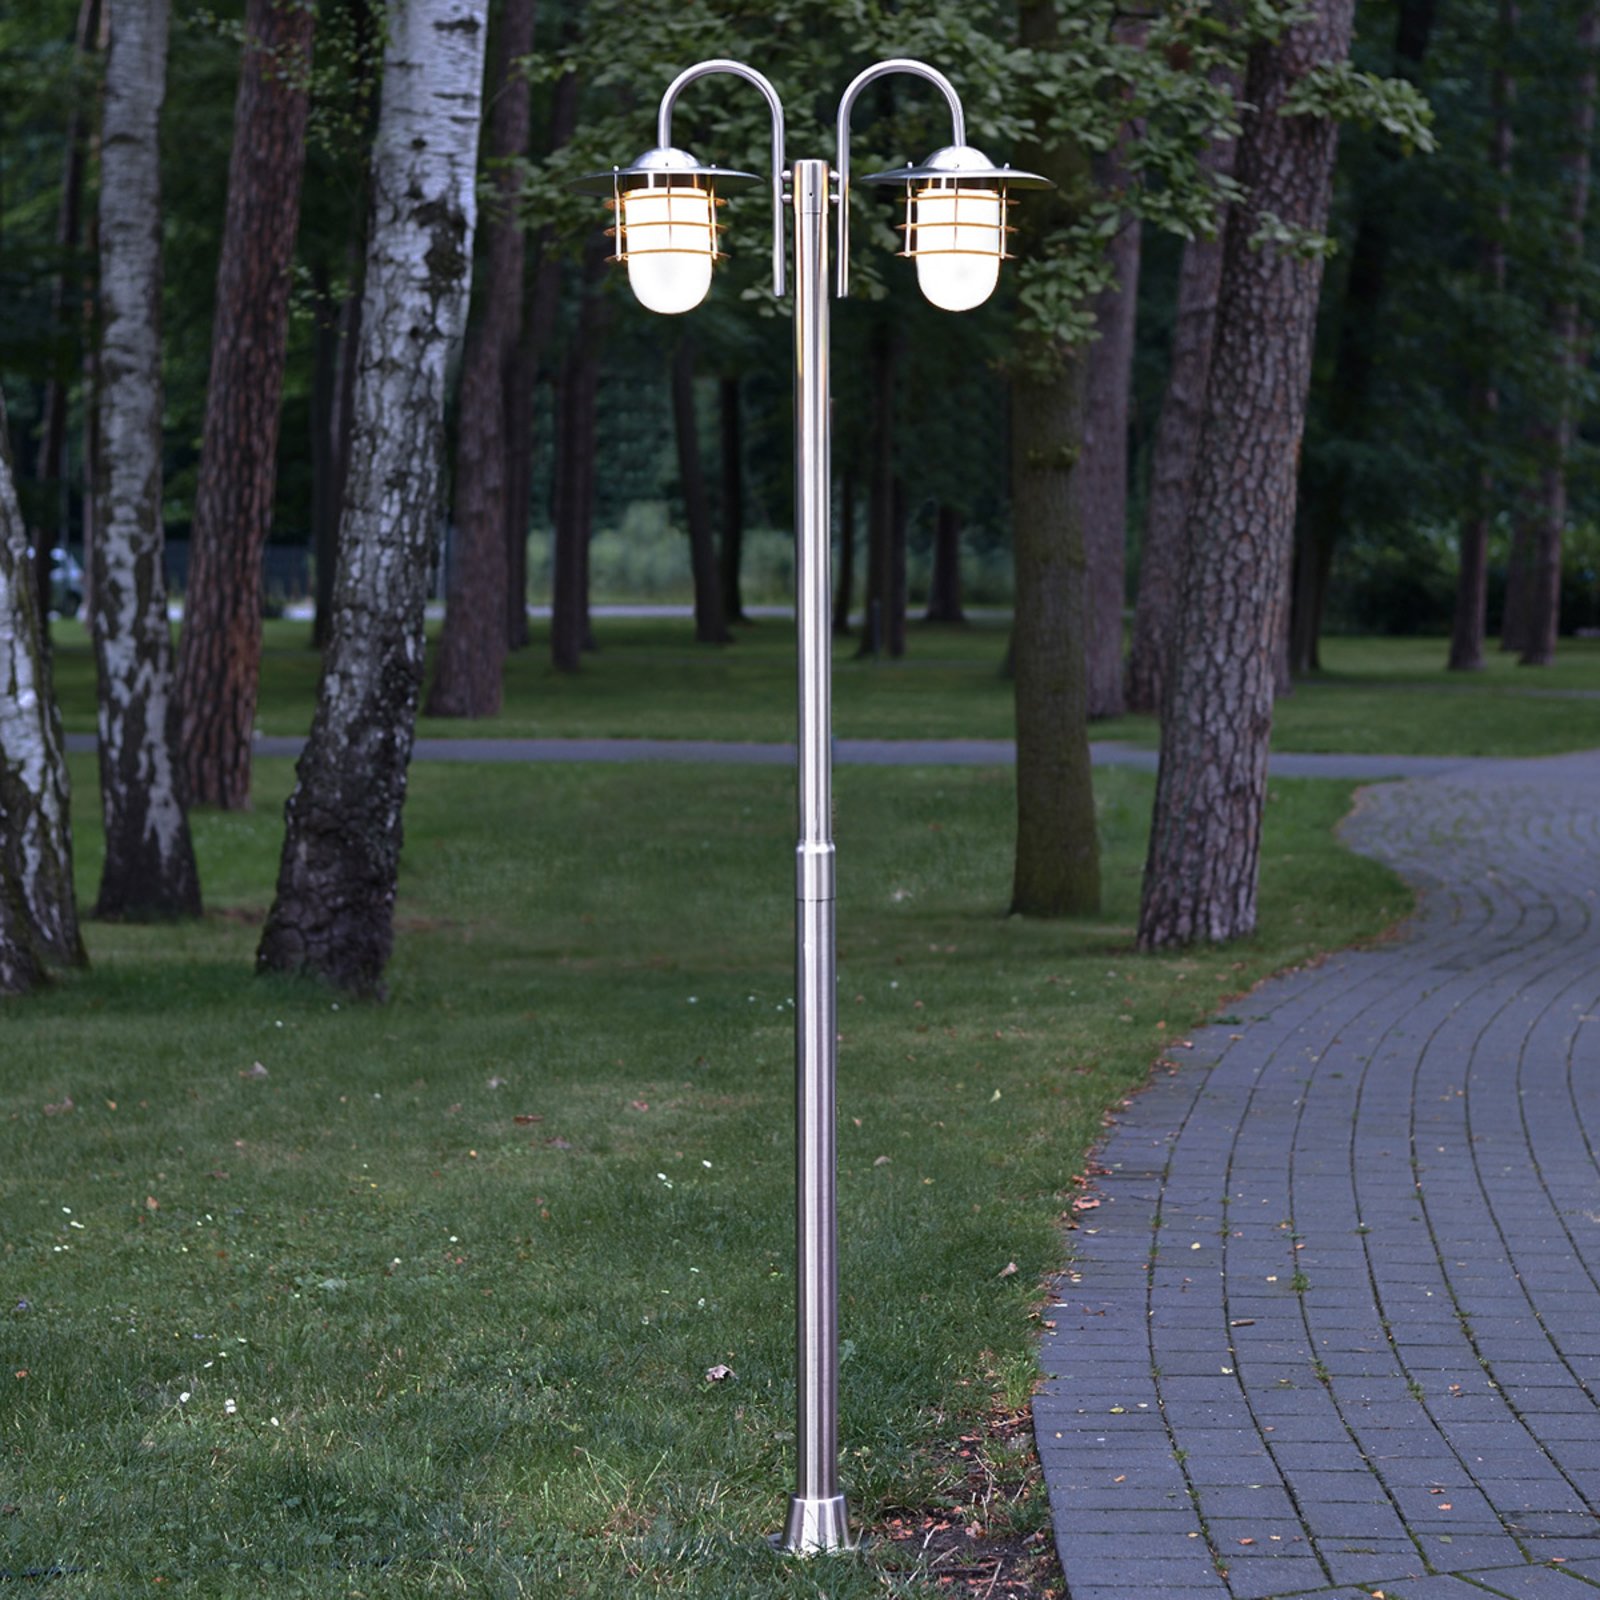 Mian two-bulb lamp post made of stainless steel